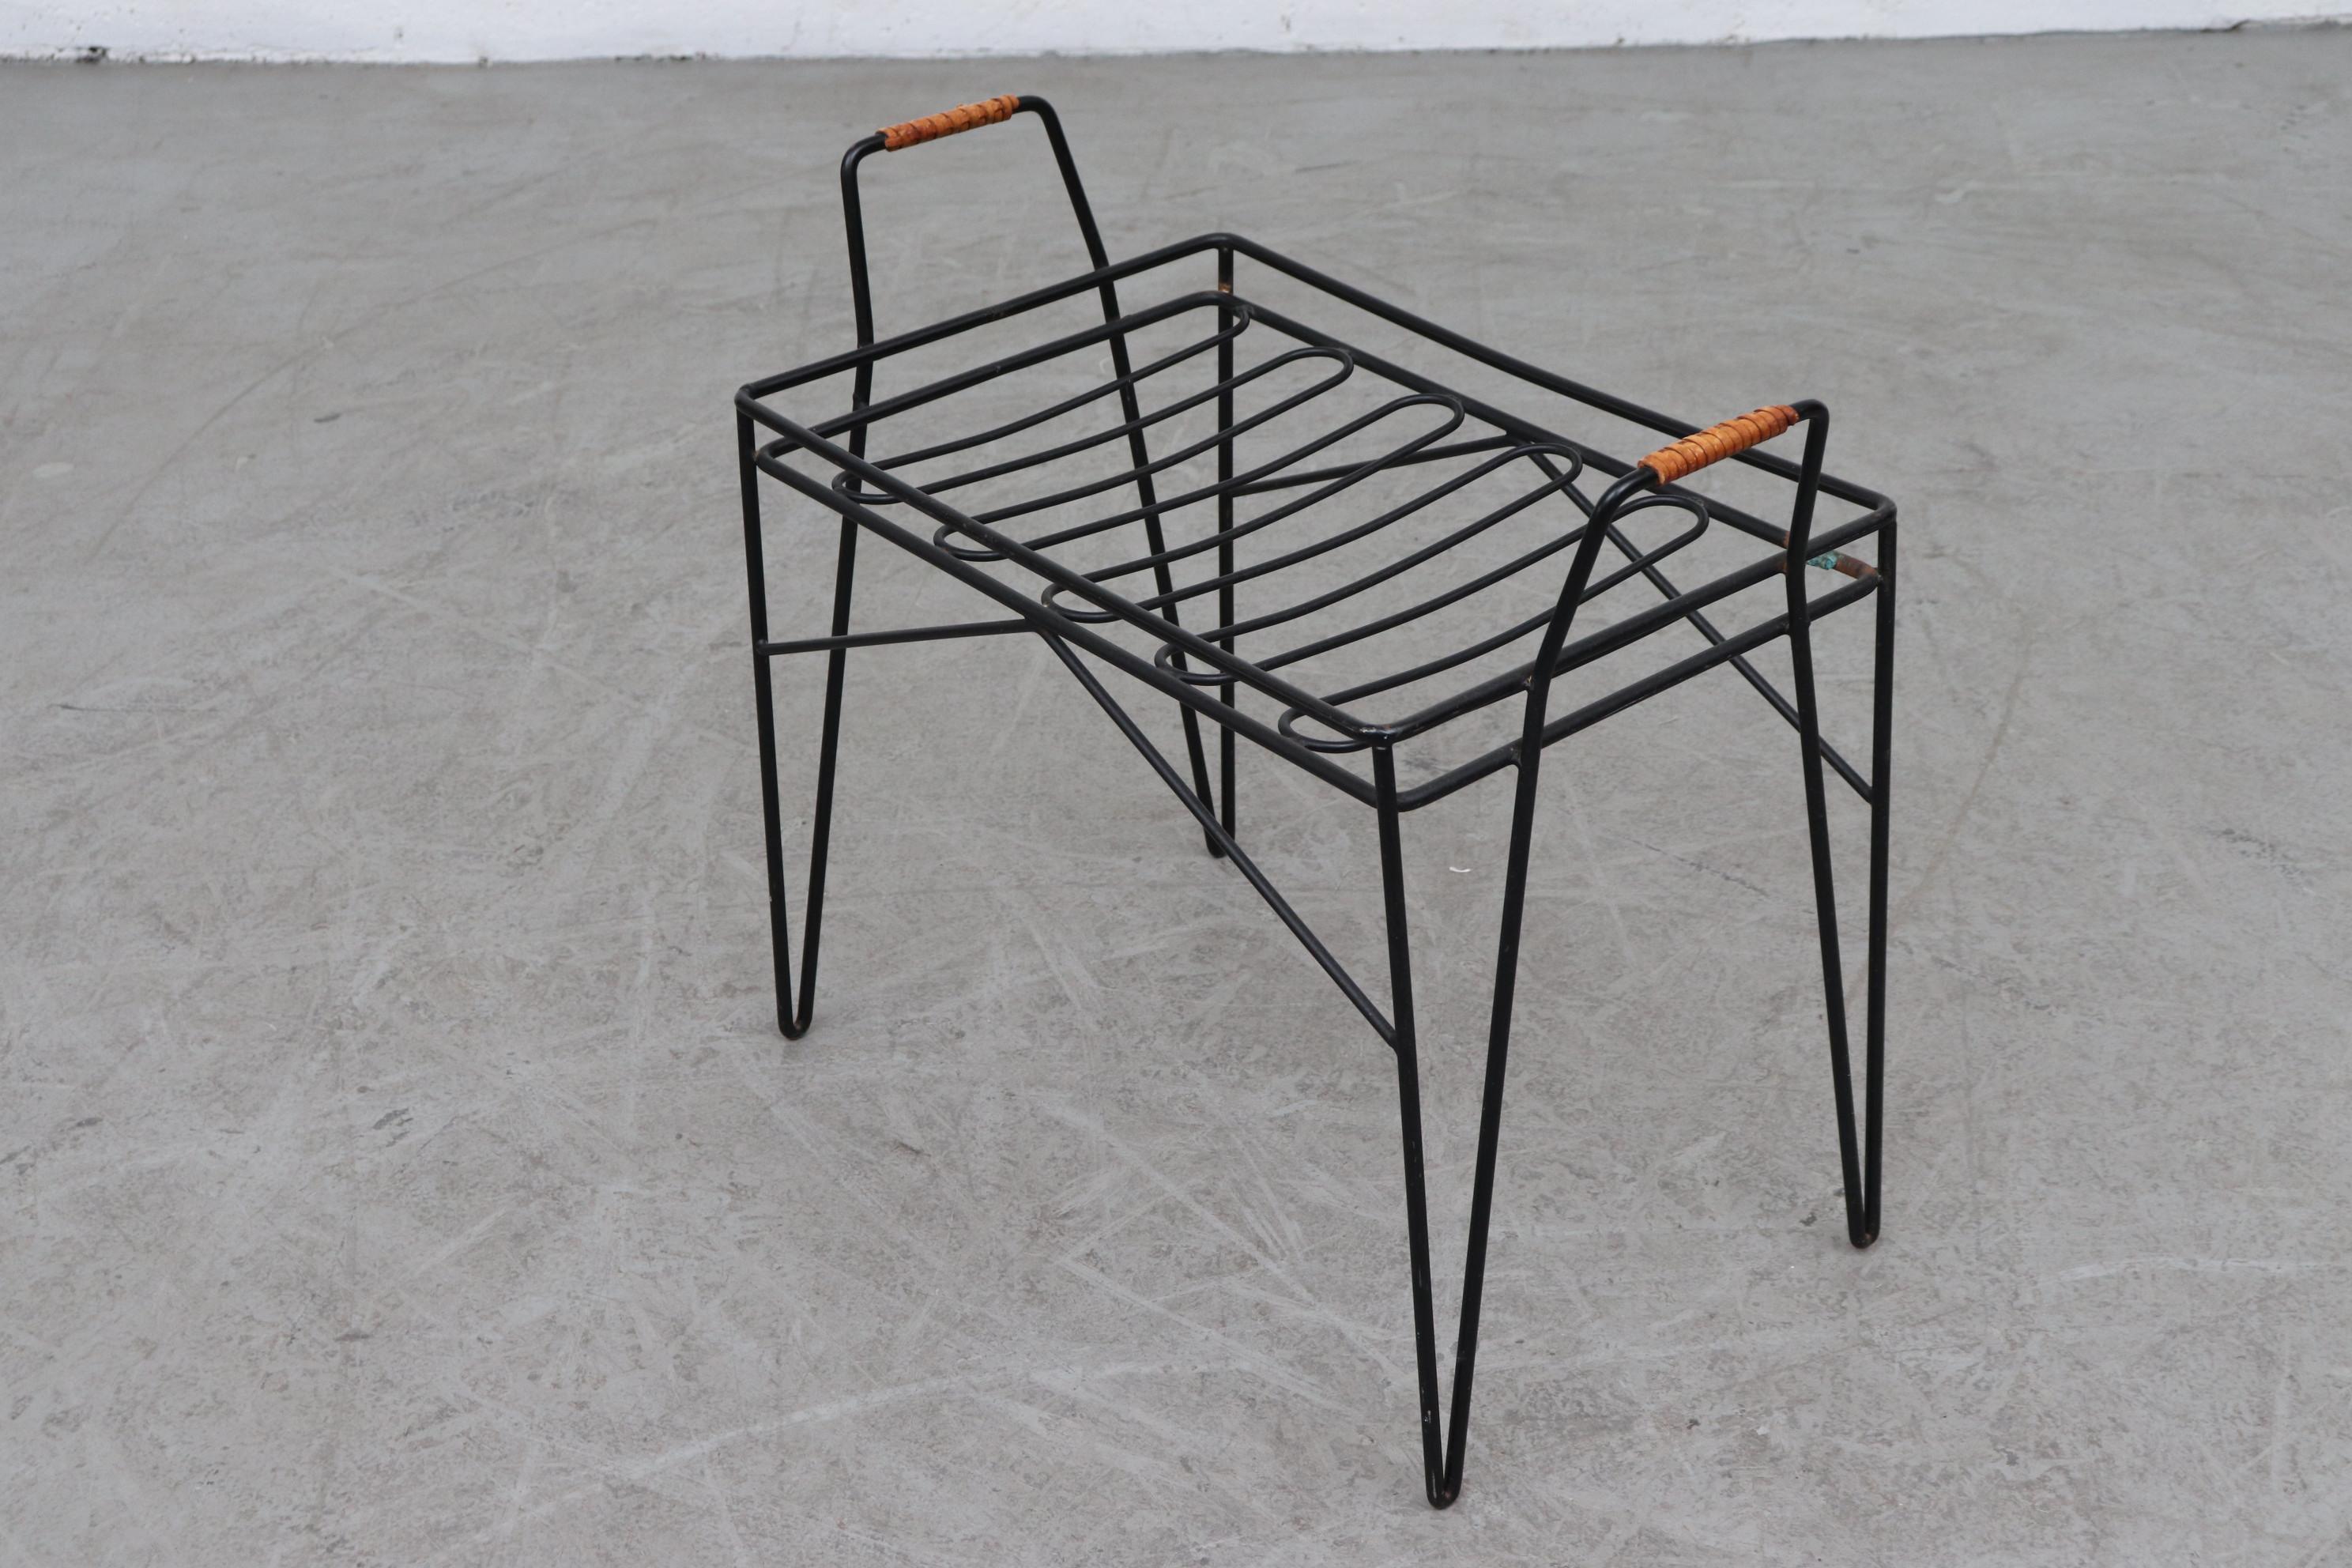 Sweet midcentury black enameled metal wire framed stool with new natural canvas seating and leather wrapped handles. Metal in original condition with visible wear. Leather has nice patina.